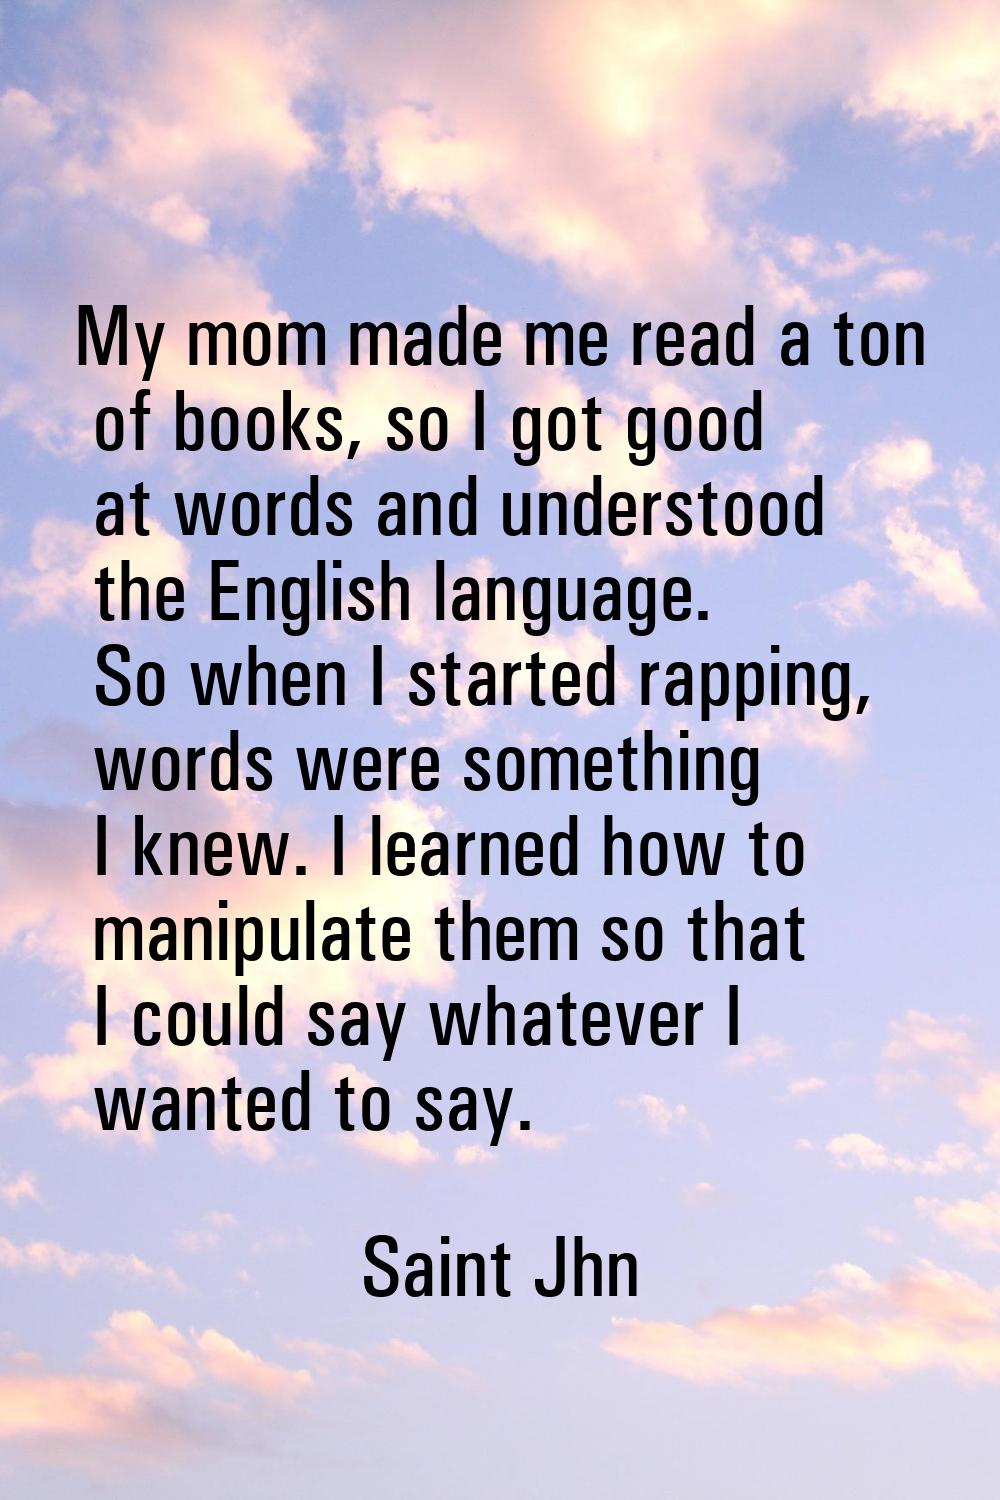 My mom made me read a ton of books, so I got good at words and understood the English language. So 